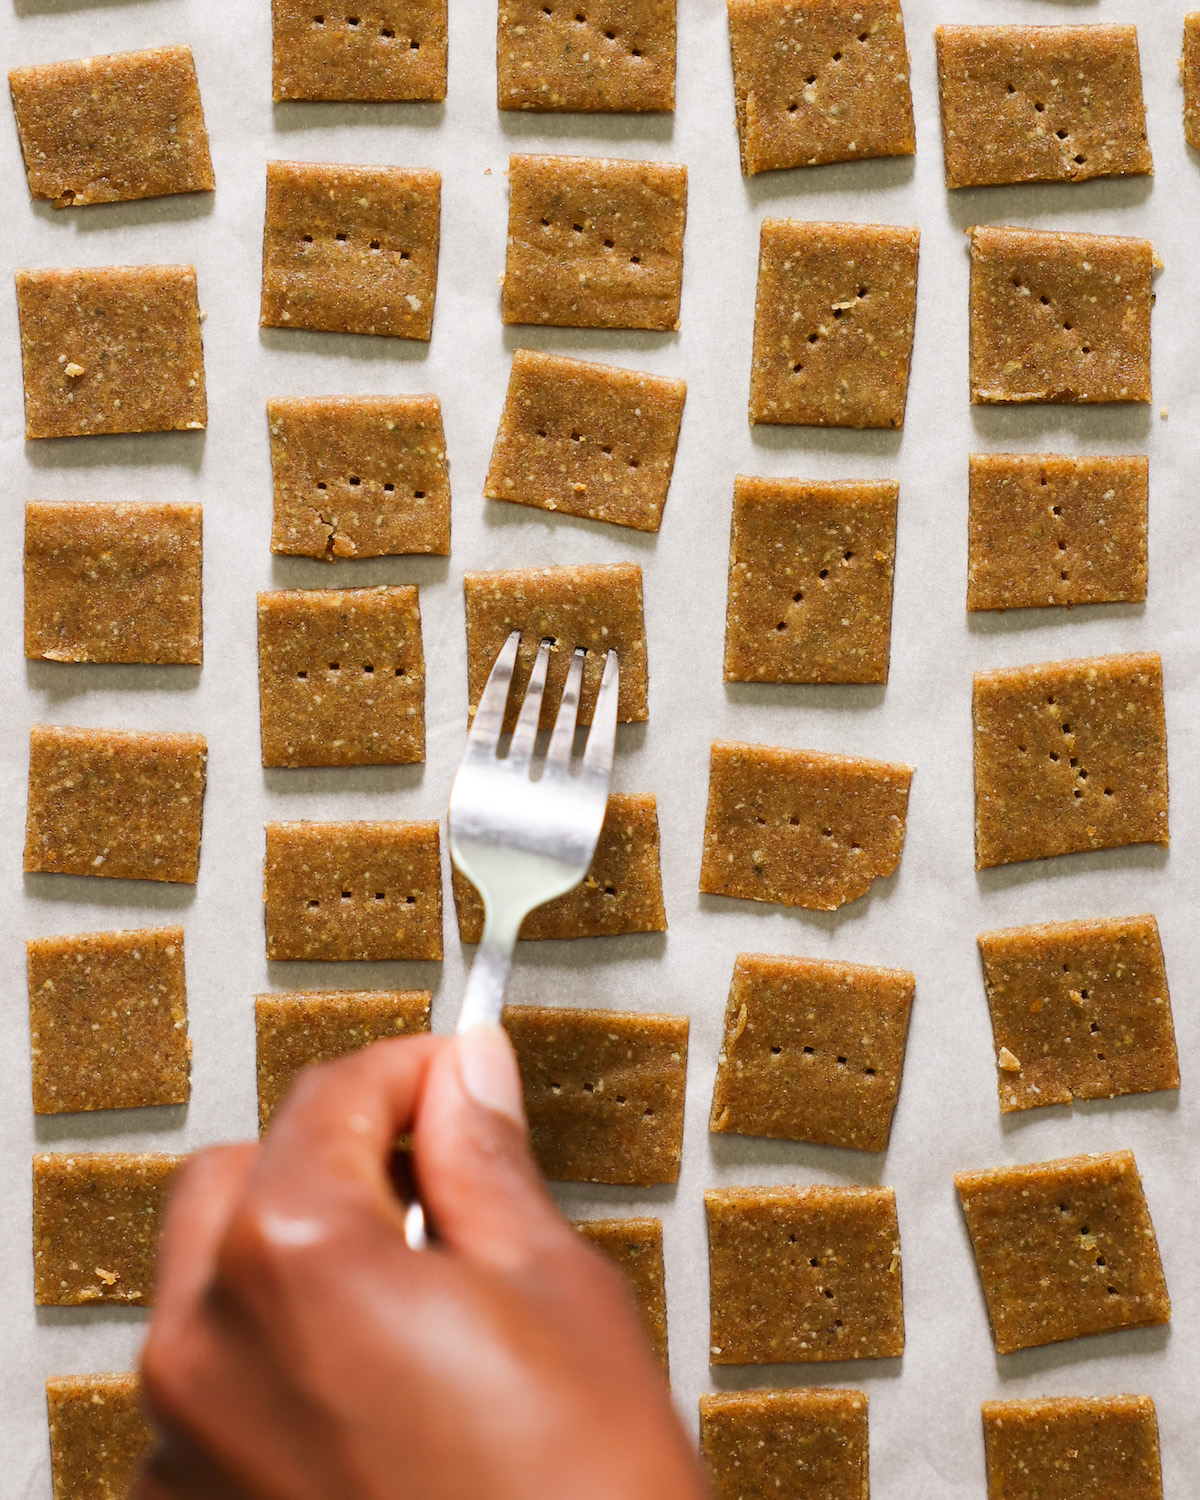 Poking holes in the pumpkin seed crackers with a fork before baking.